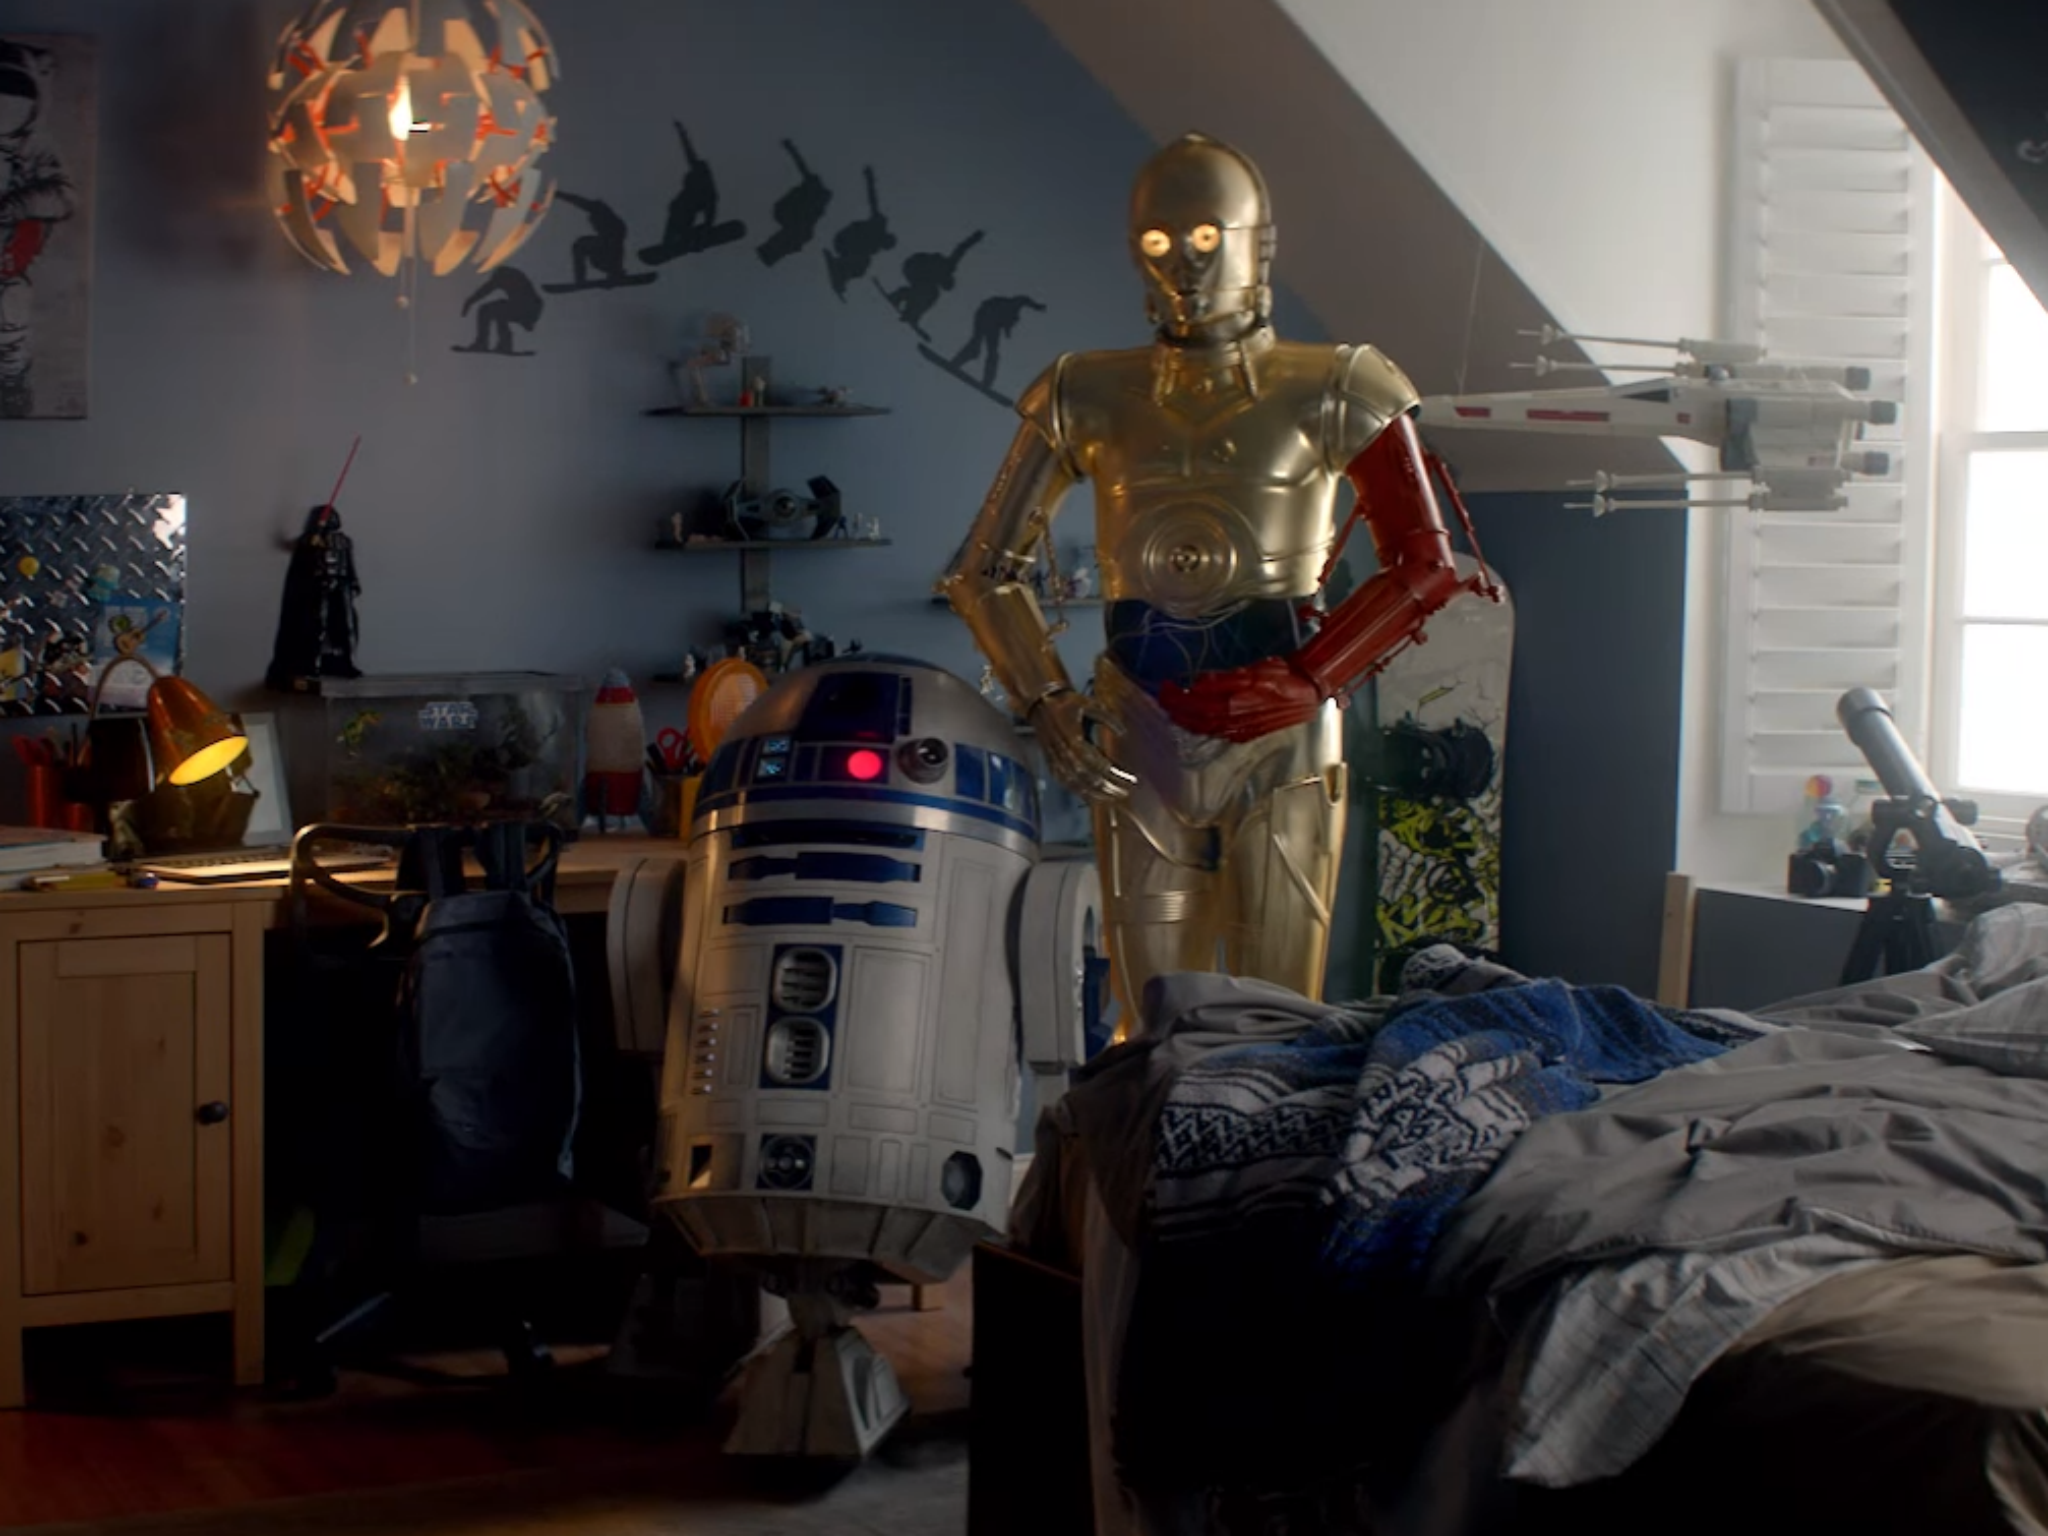 C-3PO and R2-D2 star in the Duracell Christmas ad ahead of Star Wars 7 reaching cinemas